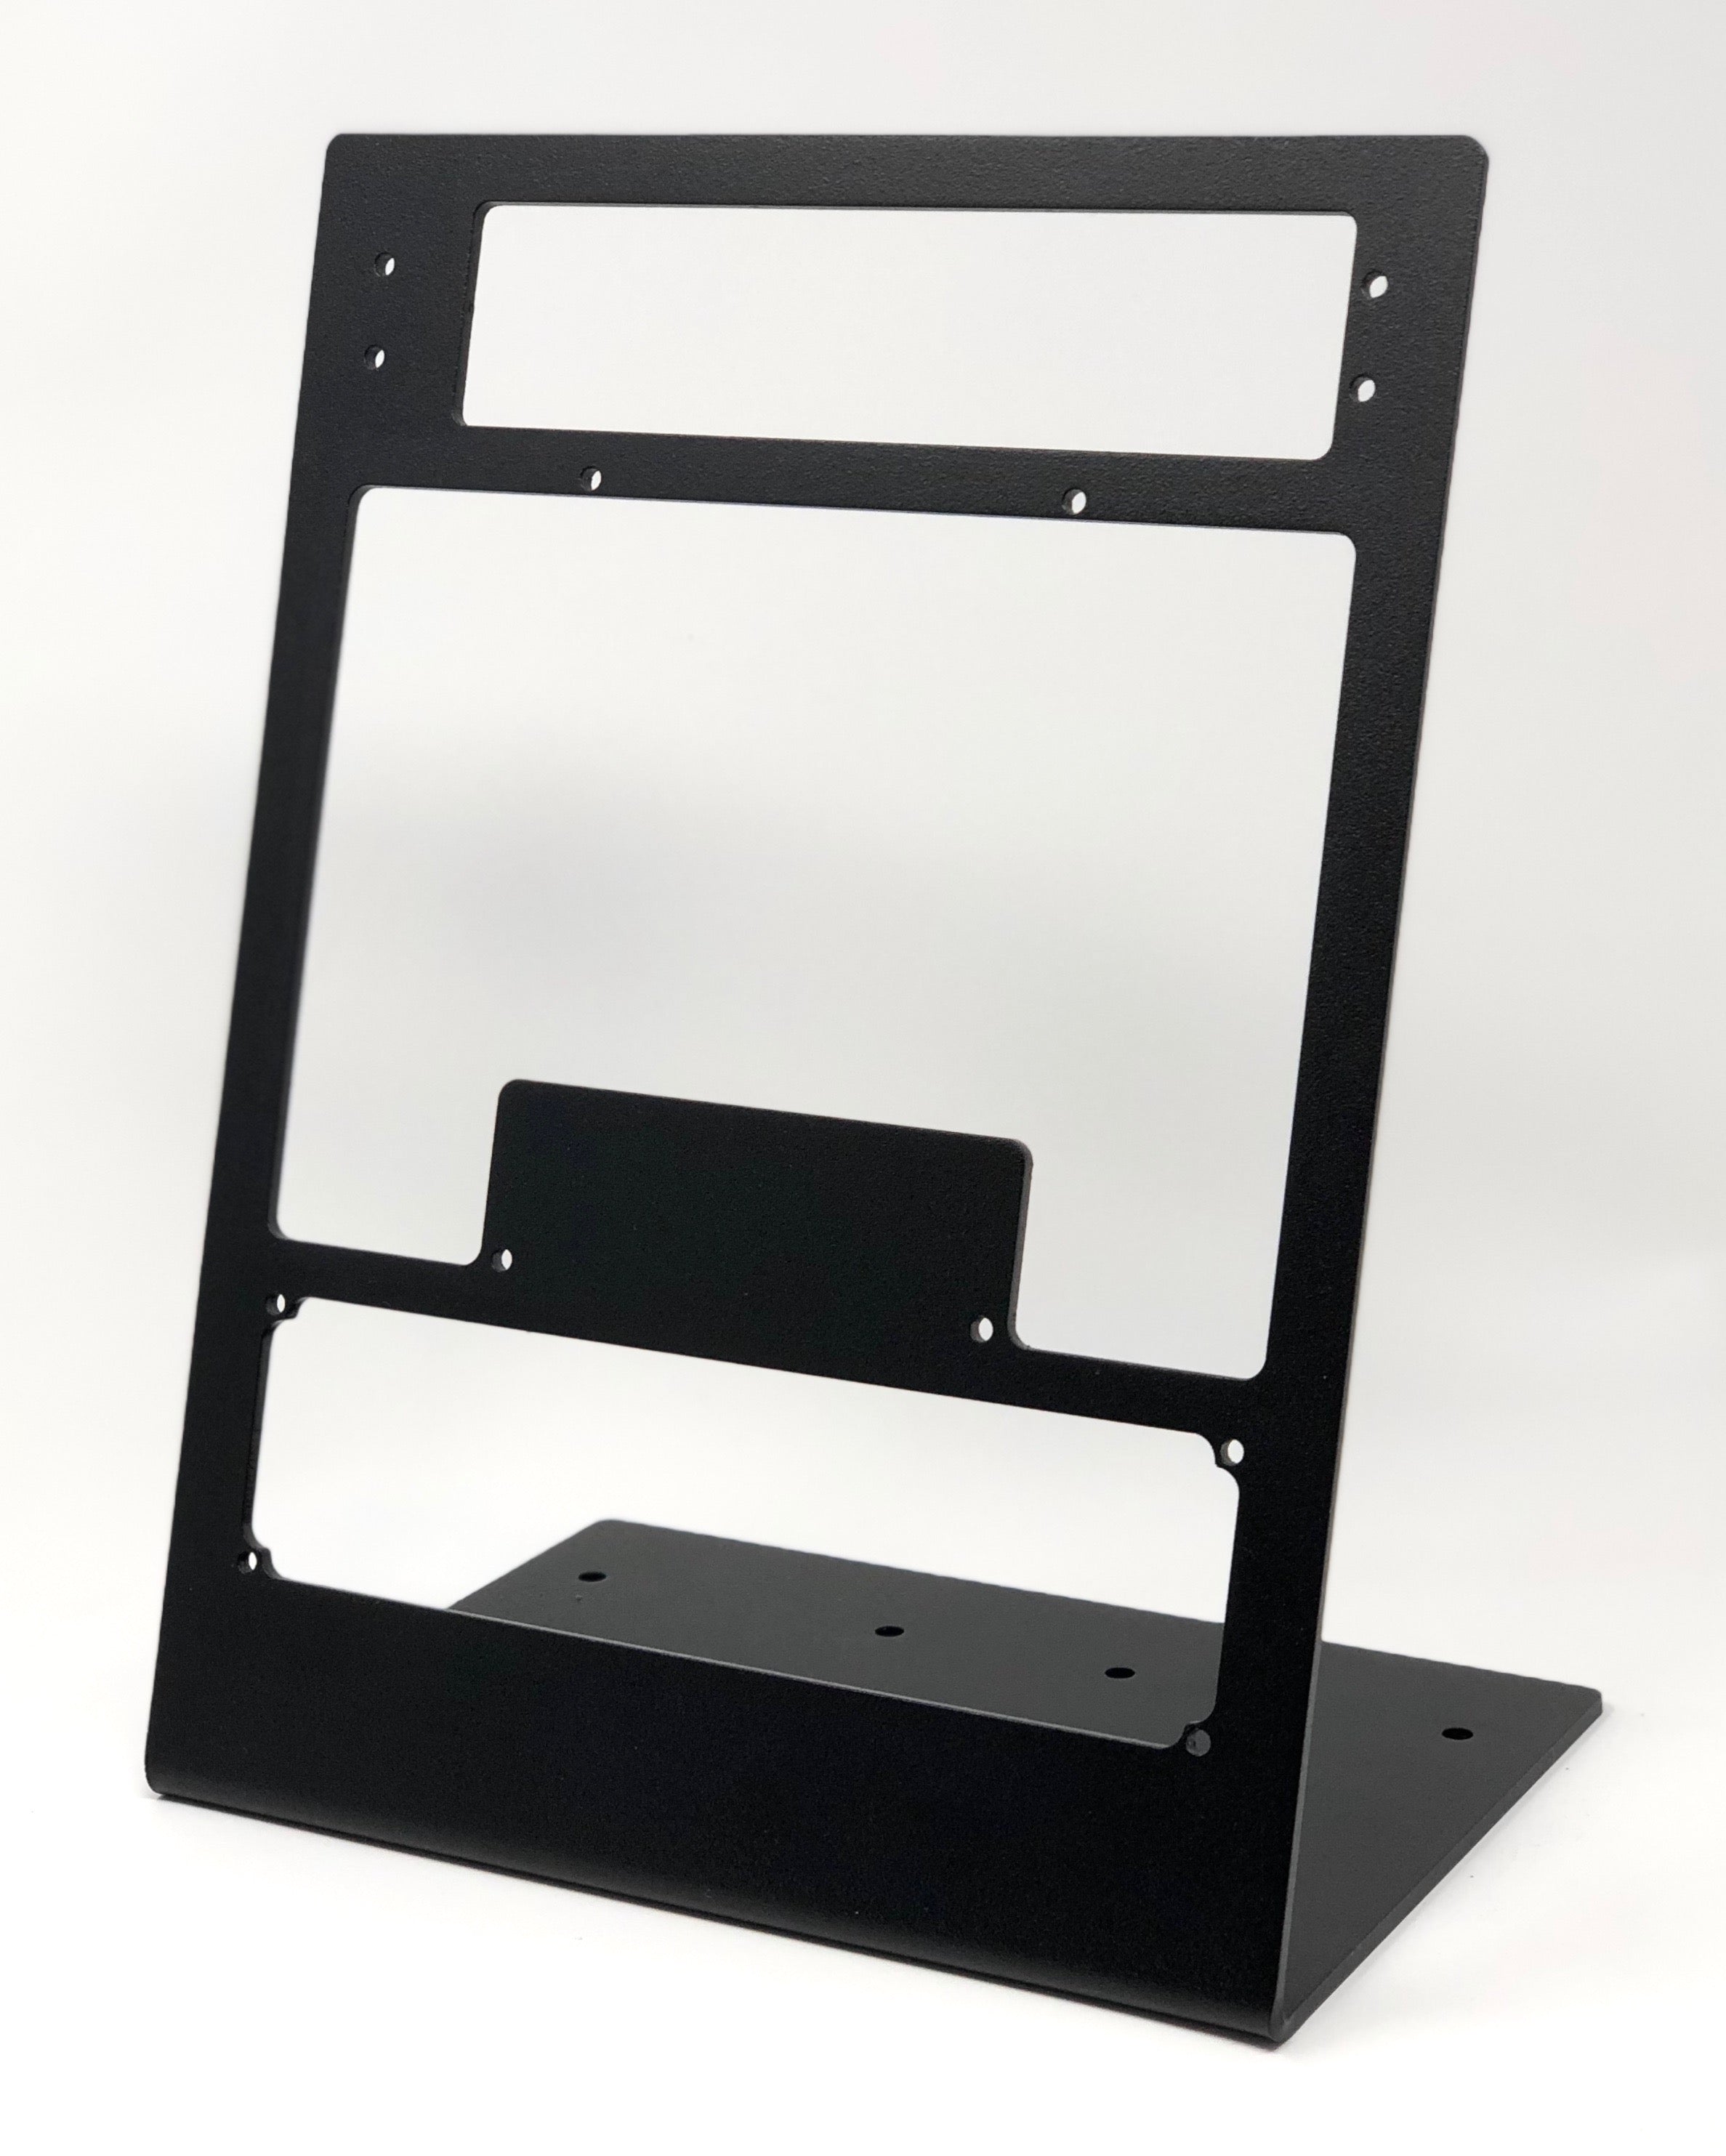 Desktop stand for RealSimGear GNS530 GMA350 GFC700